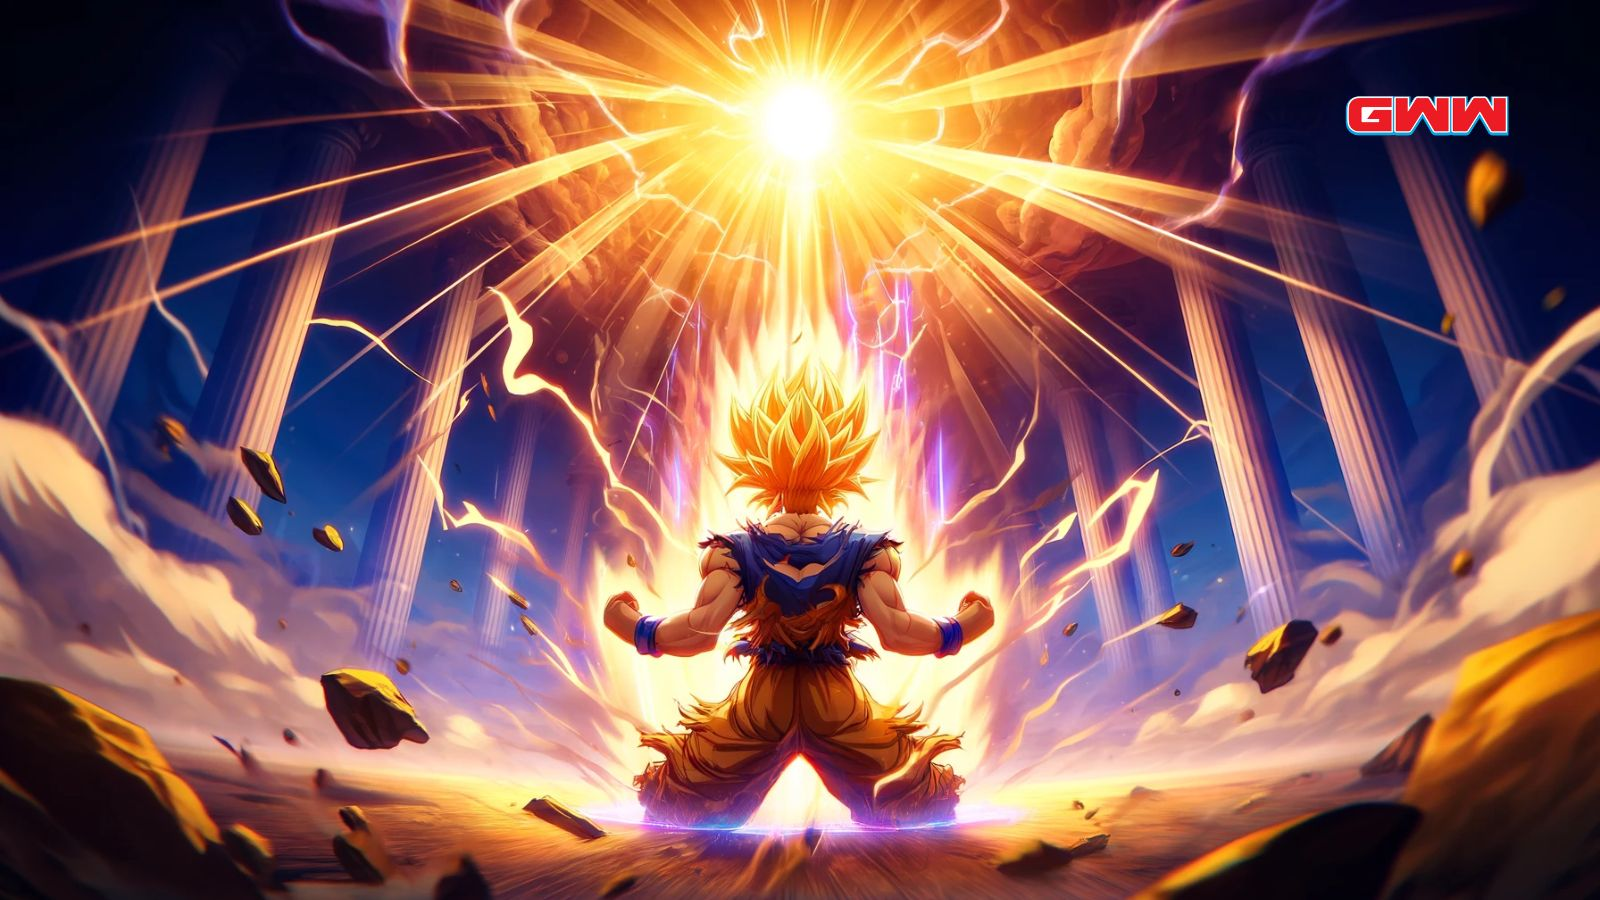 A character transformation into a Super Saiyan in the game